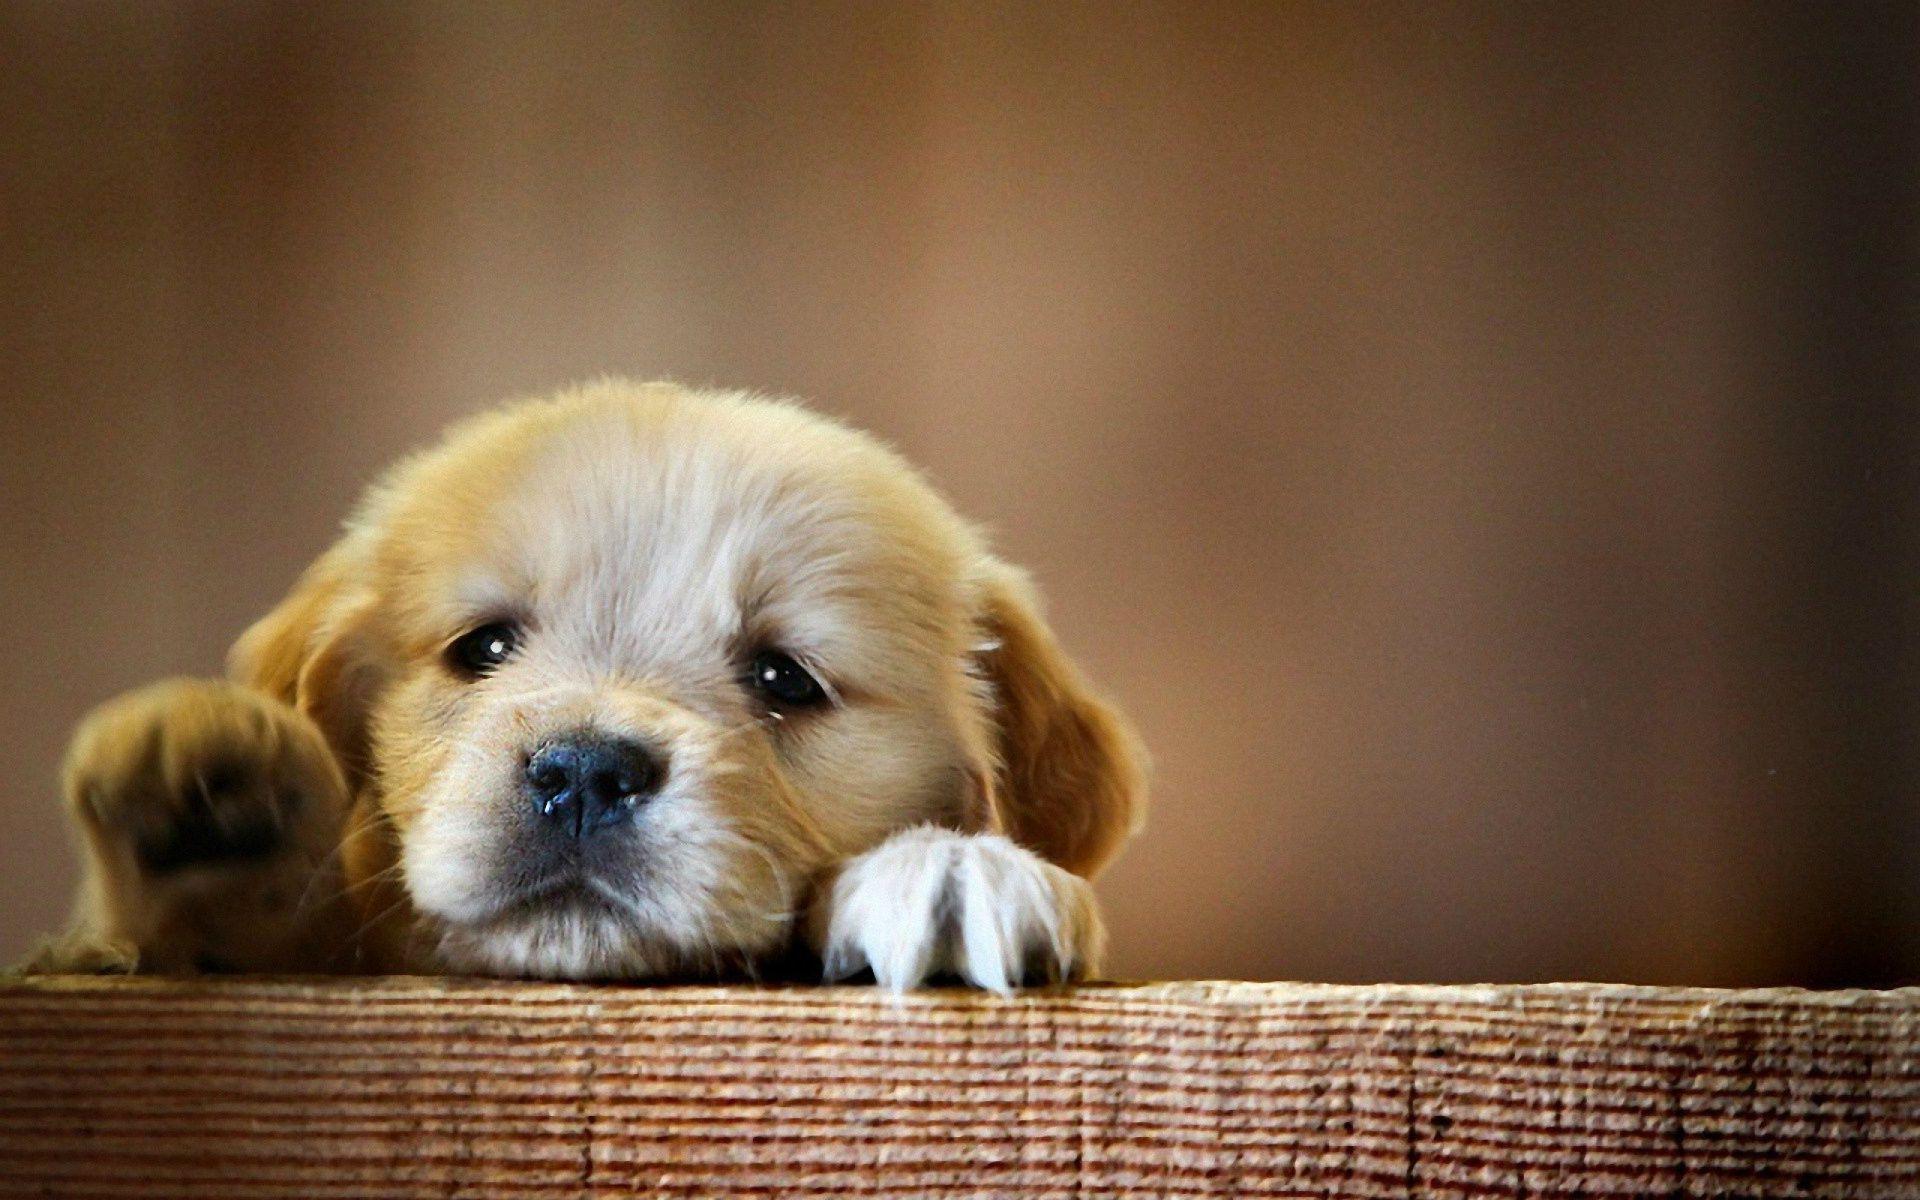 A cute puppy with its paws on the edge of a wooden table - Dog